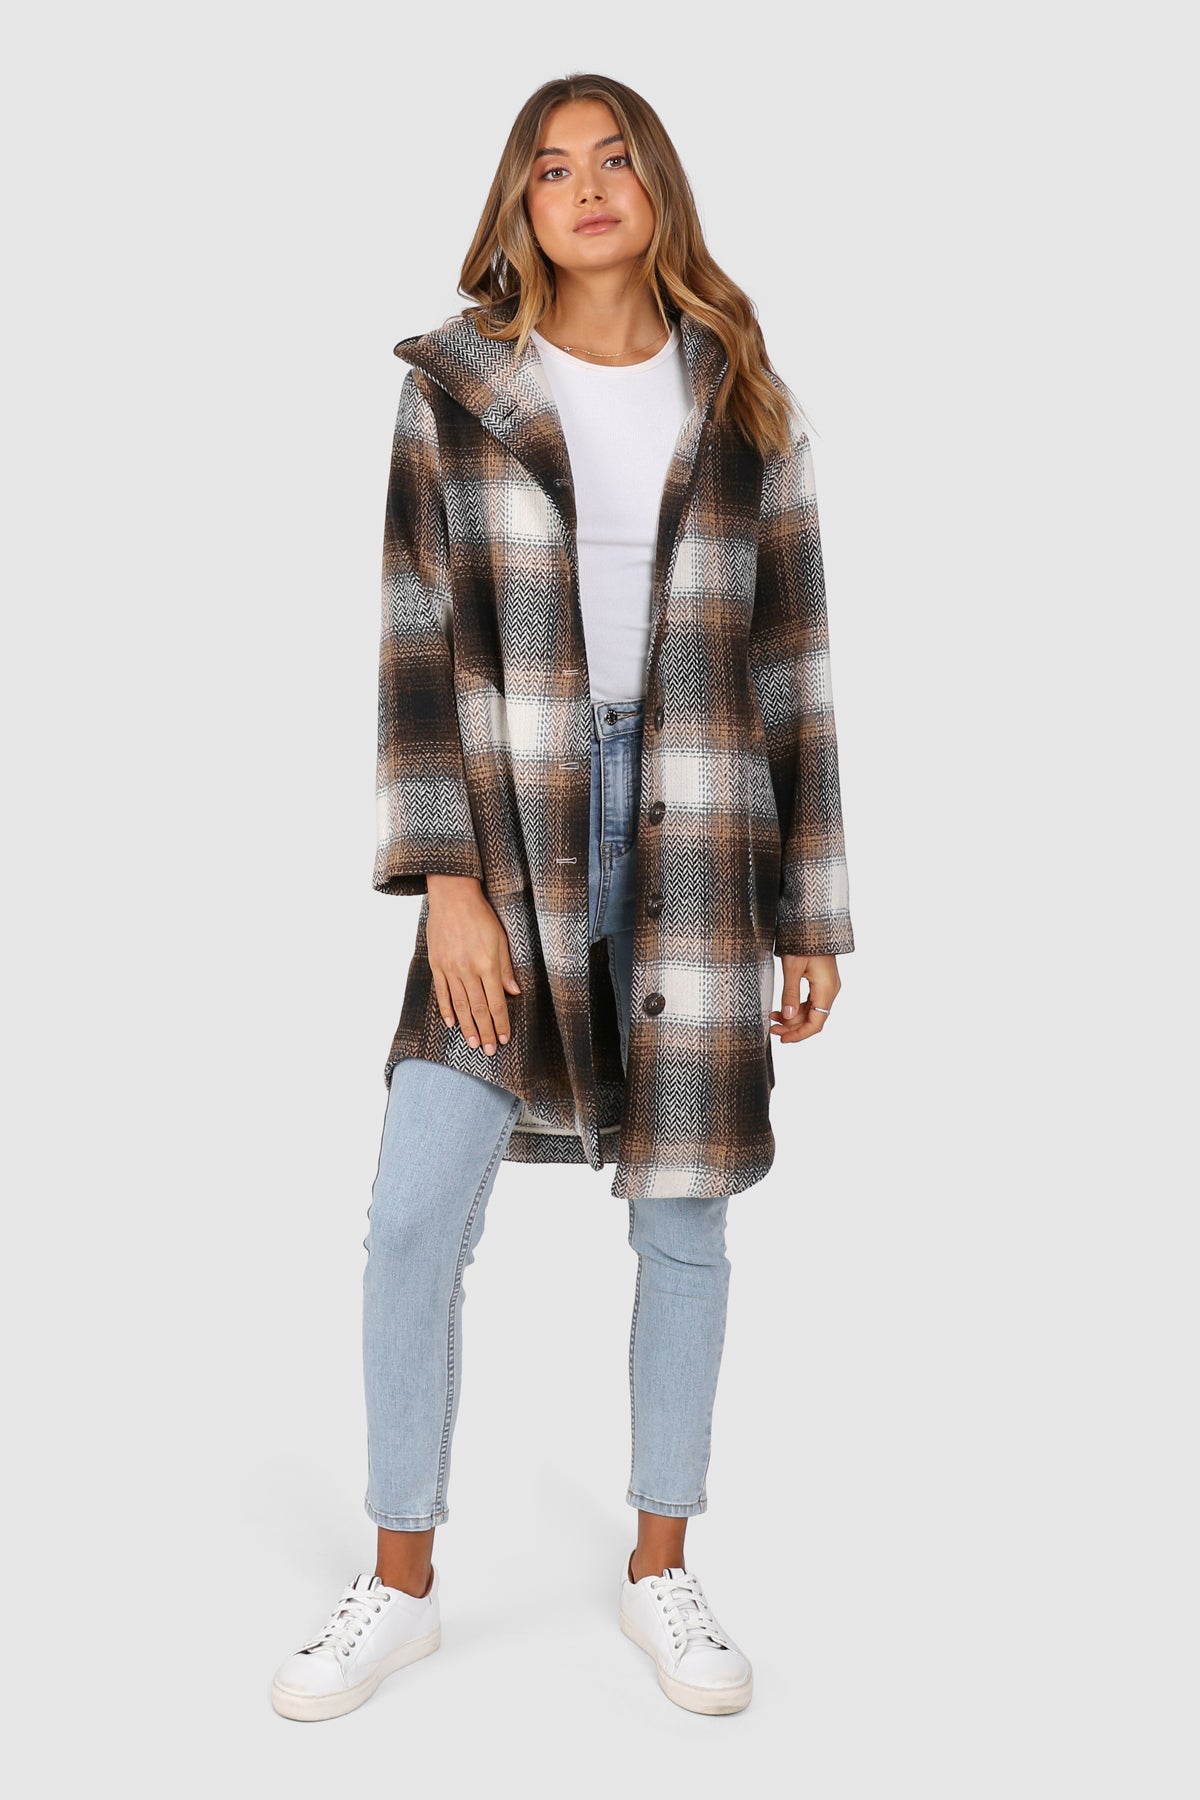 Bailage Haired Caucasian female wearing Plaid Print  Two-oversized front pocket  Relaxed Shoulder  Checkered Lapel Coat  Mid-Length  Buttoned Down  Hooded  Overcoat  Jacket  paired with cotton round neck white tee and high waisted denim jeans and white sneakers 